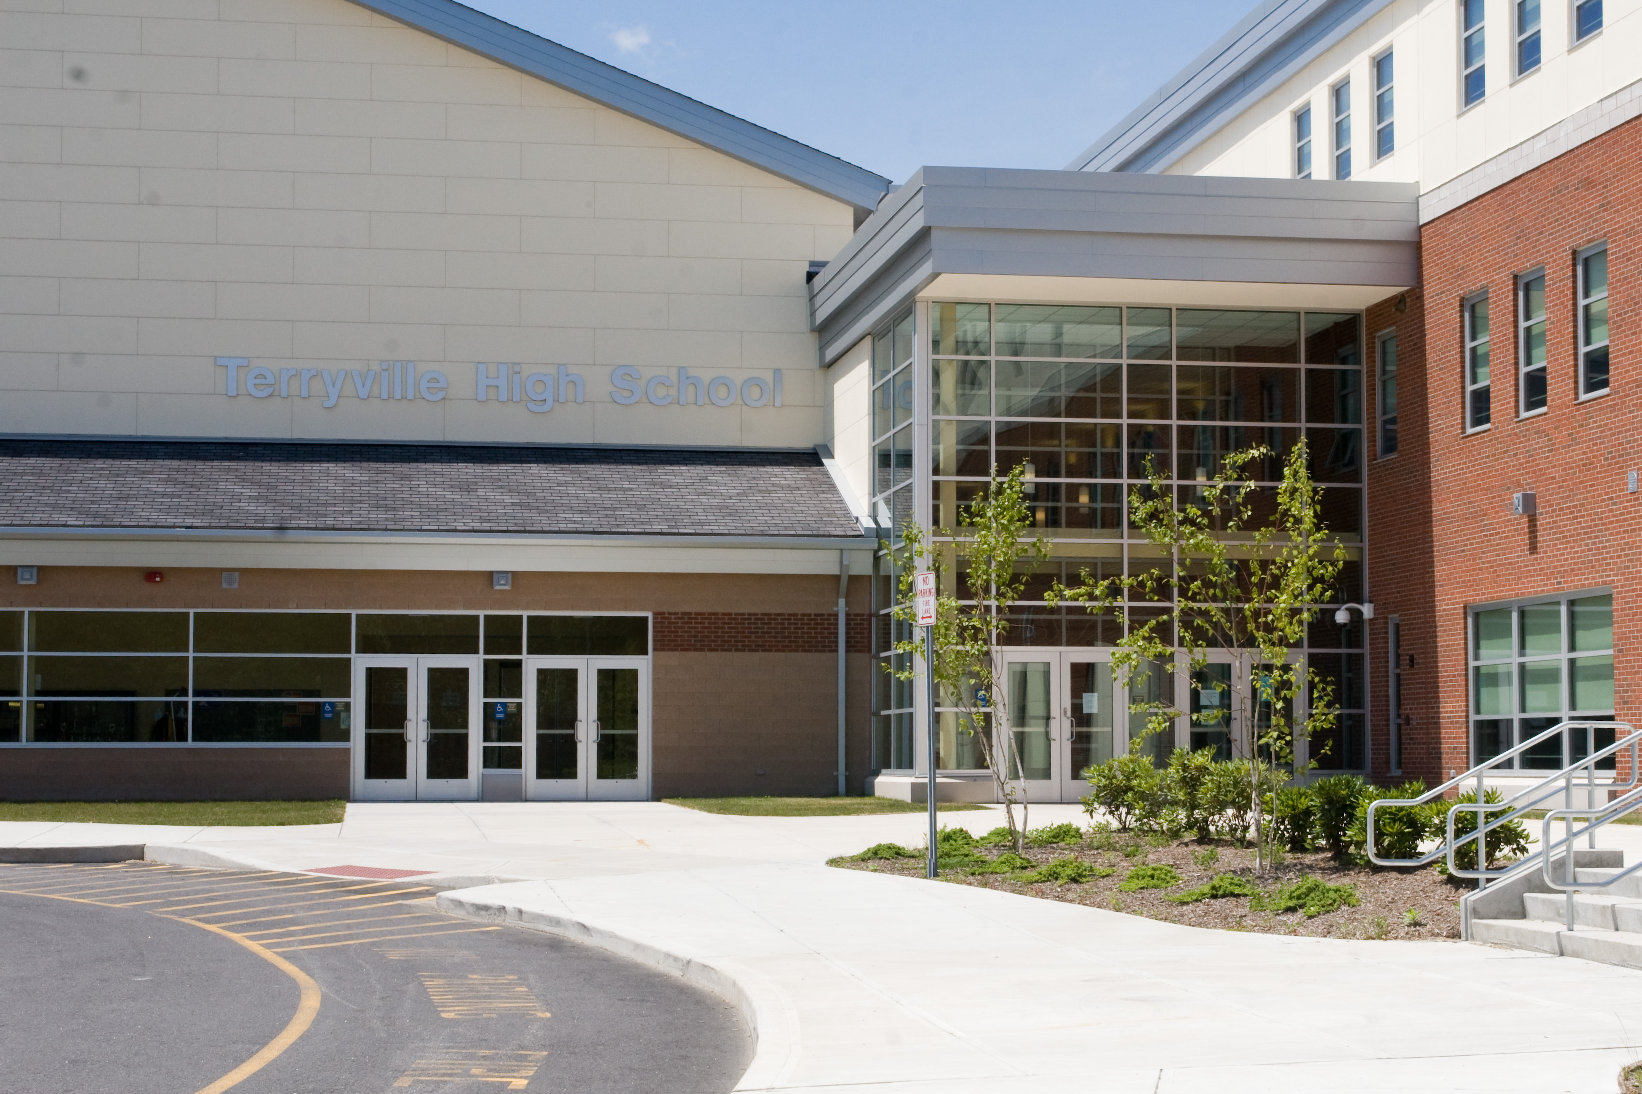 plymouthhs04.jpg